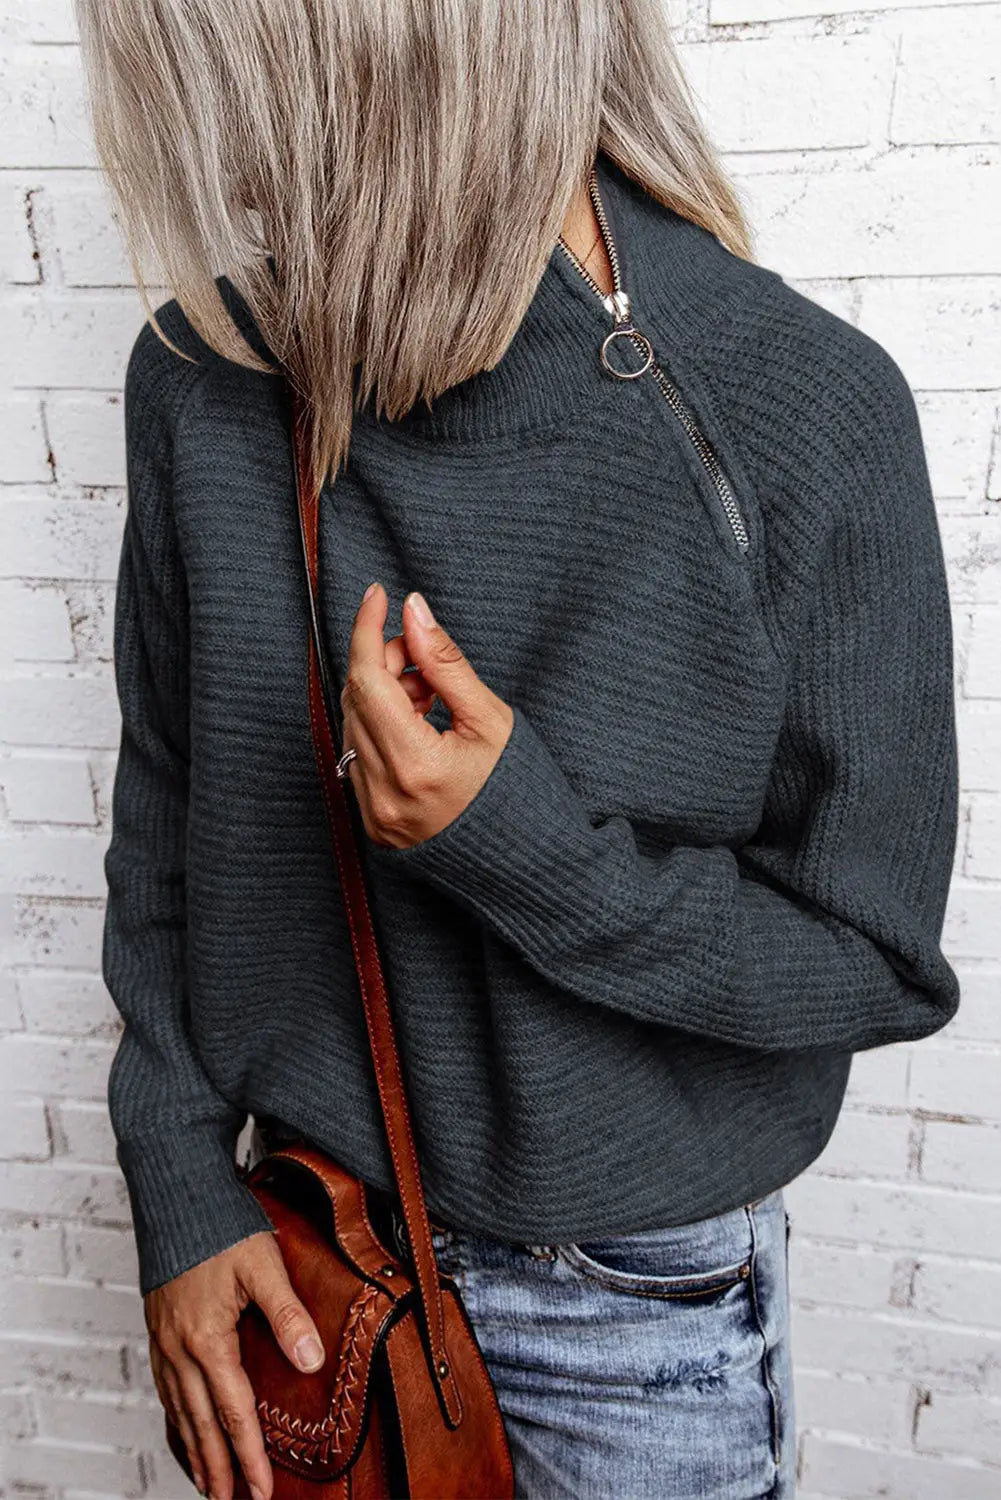 Gray zip knitted high neck sweater - sweaters & cardigans